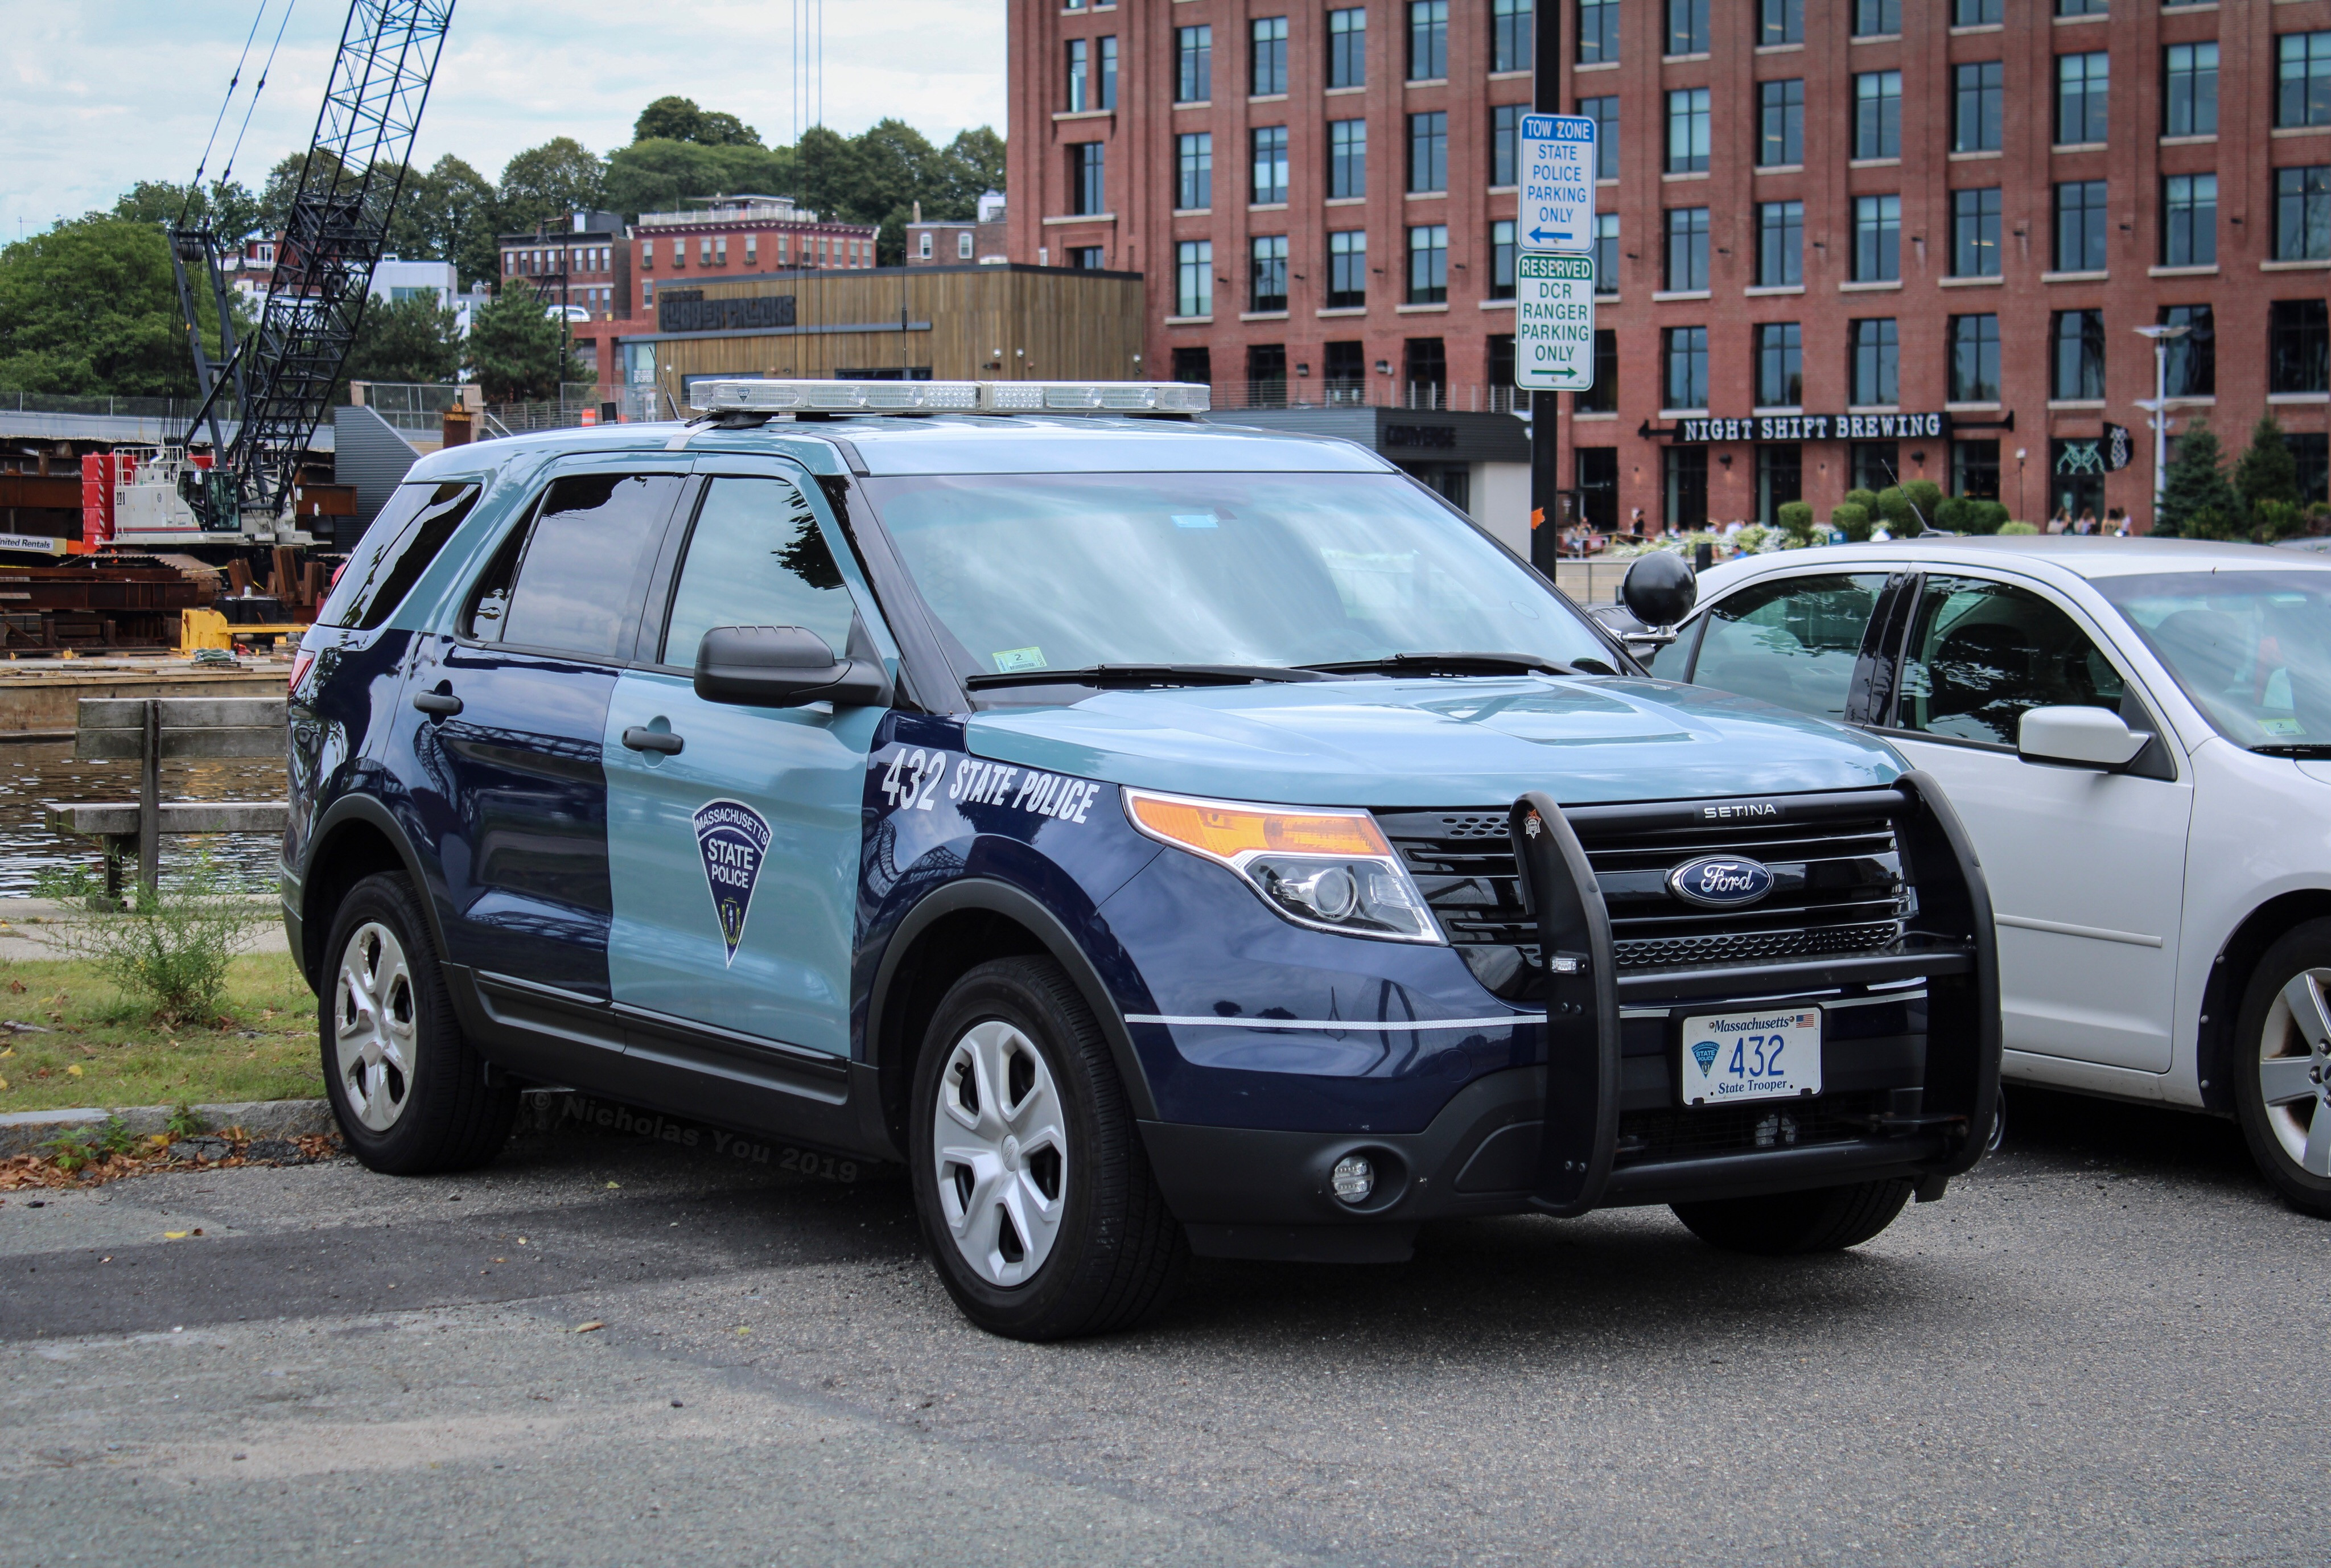 A photo  of Massachusetts State Police
            Cruiser 432, a 2015 Ford Police Interceptor Utility             taken by Nicholas You